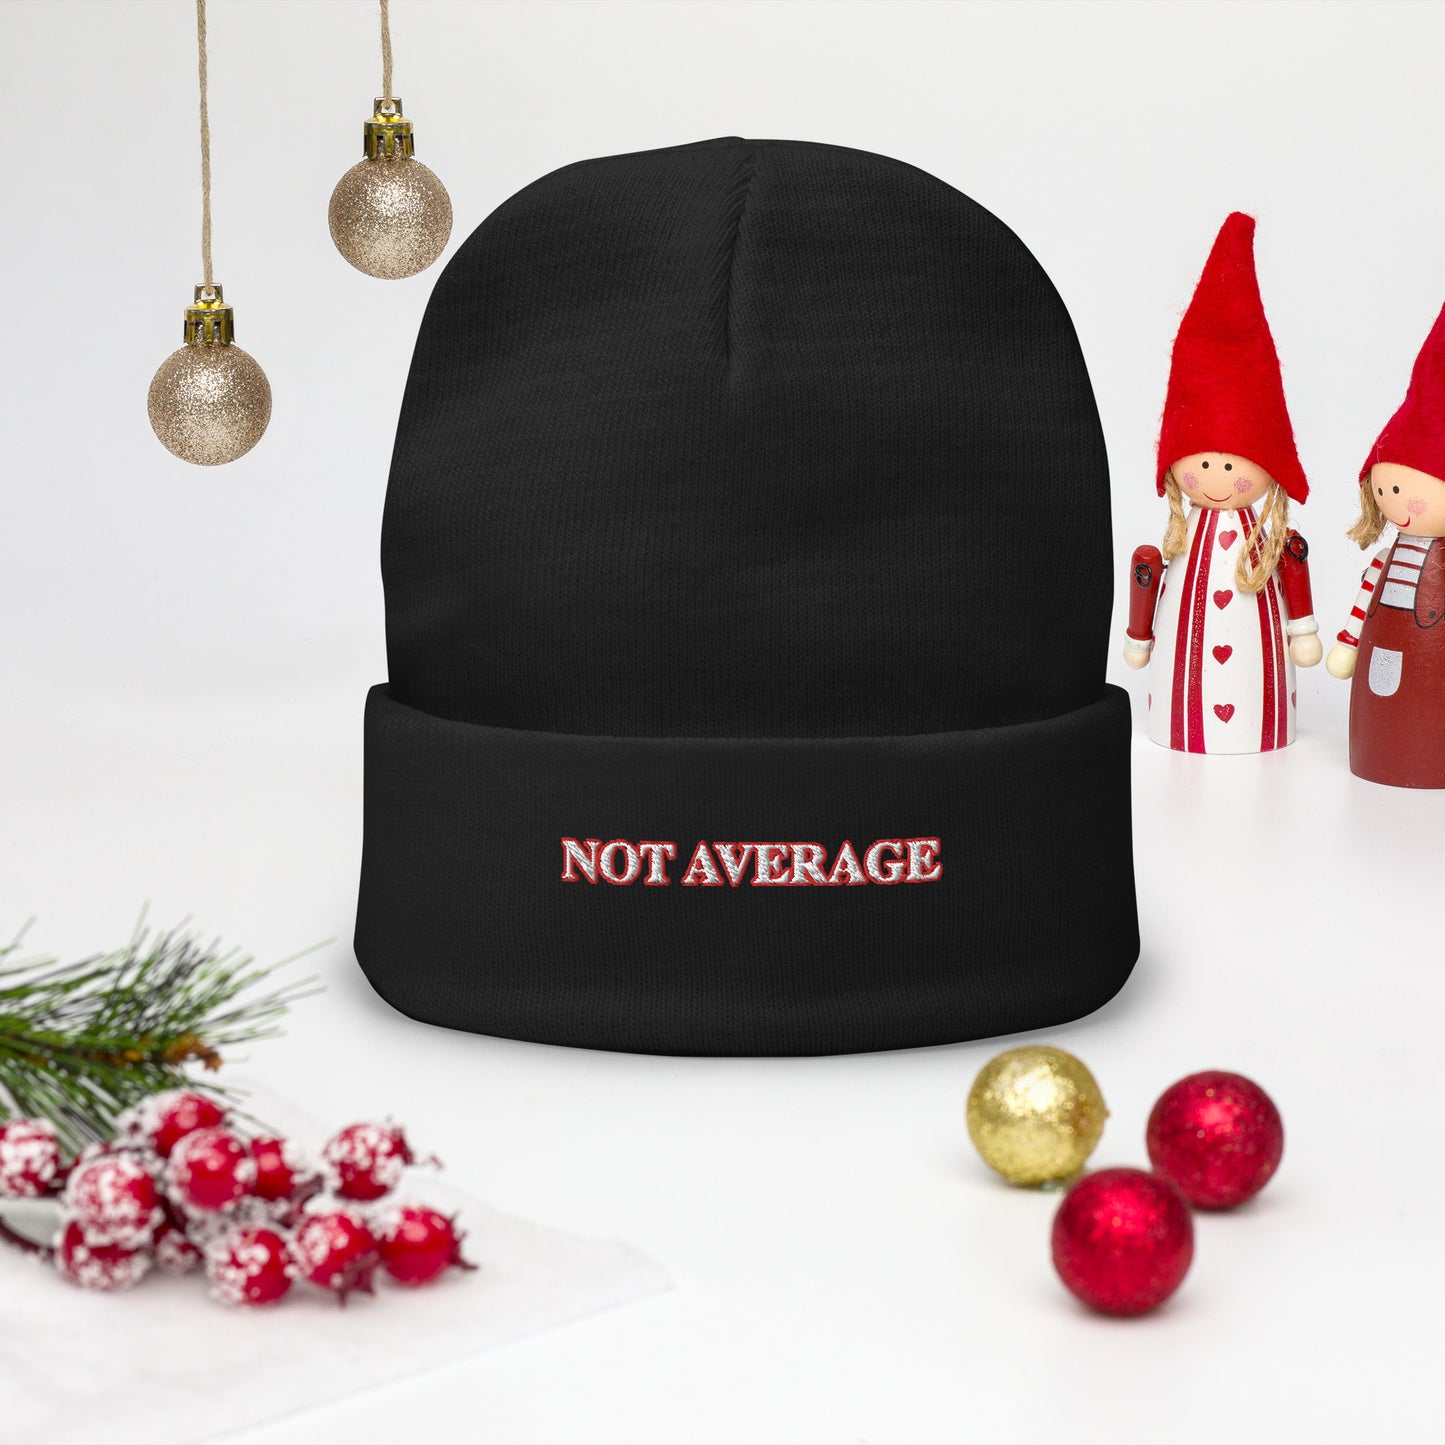 NOT AVERAGE Embroidered Beanie